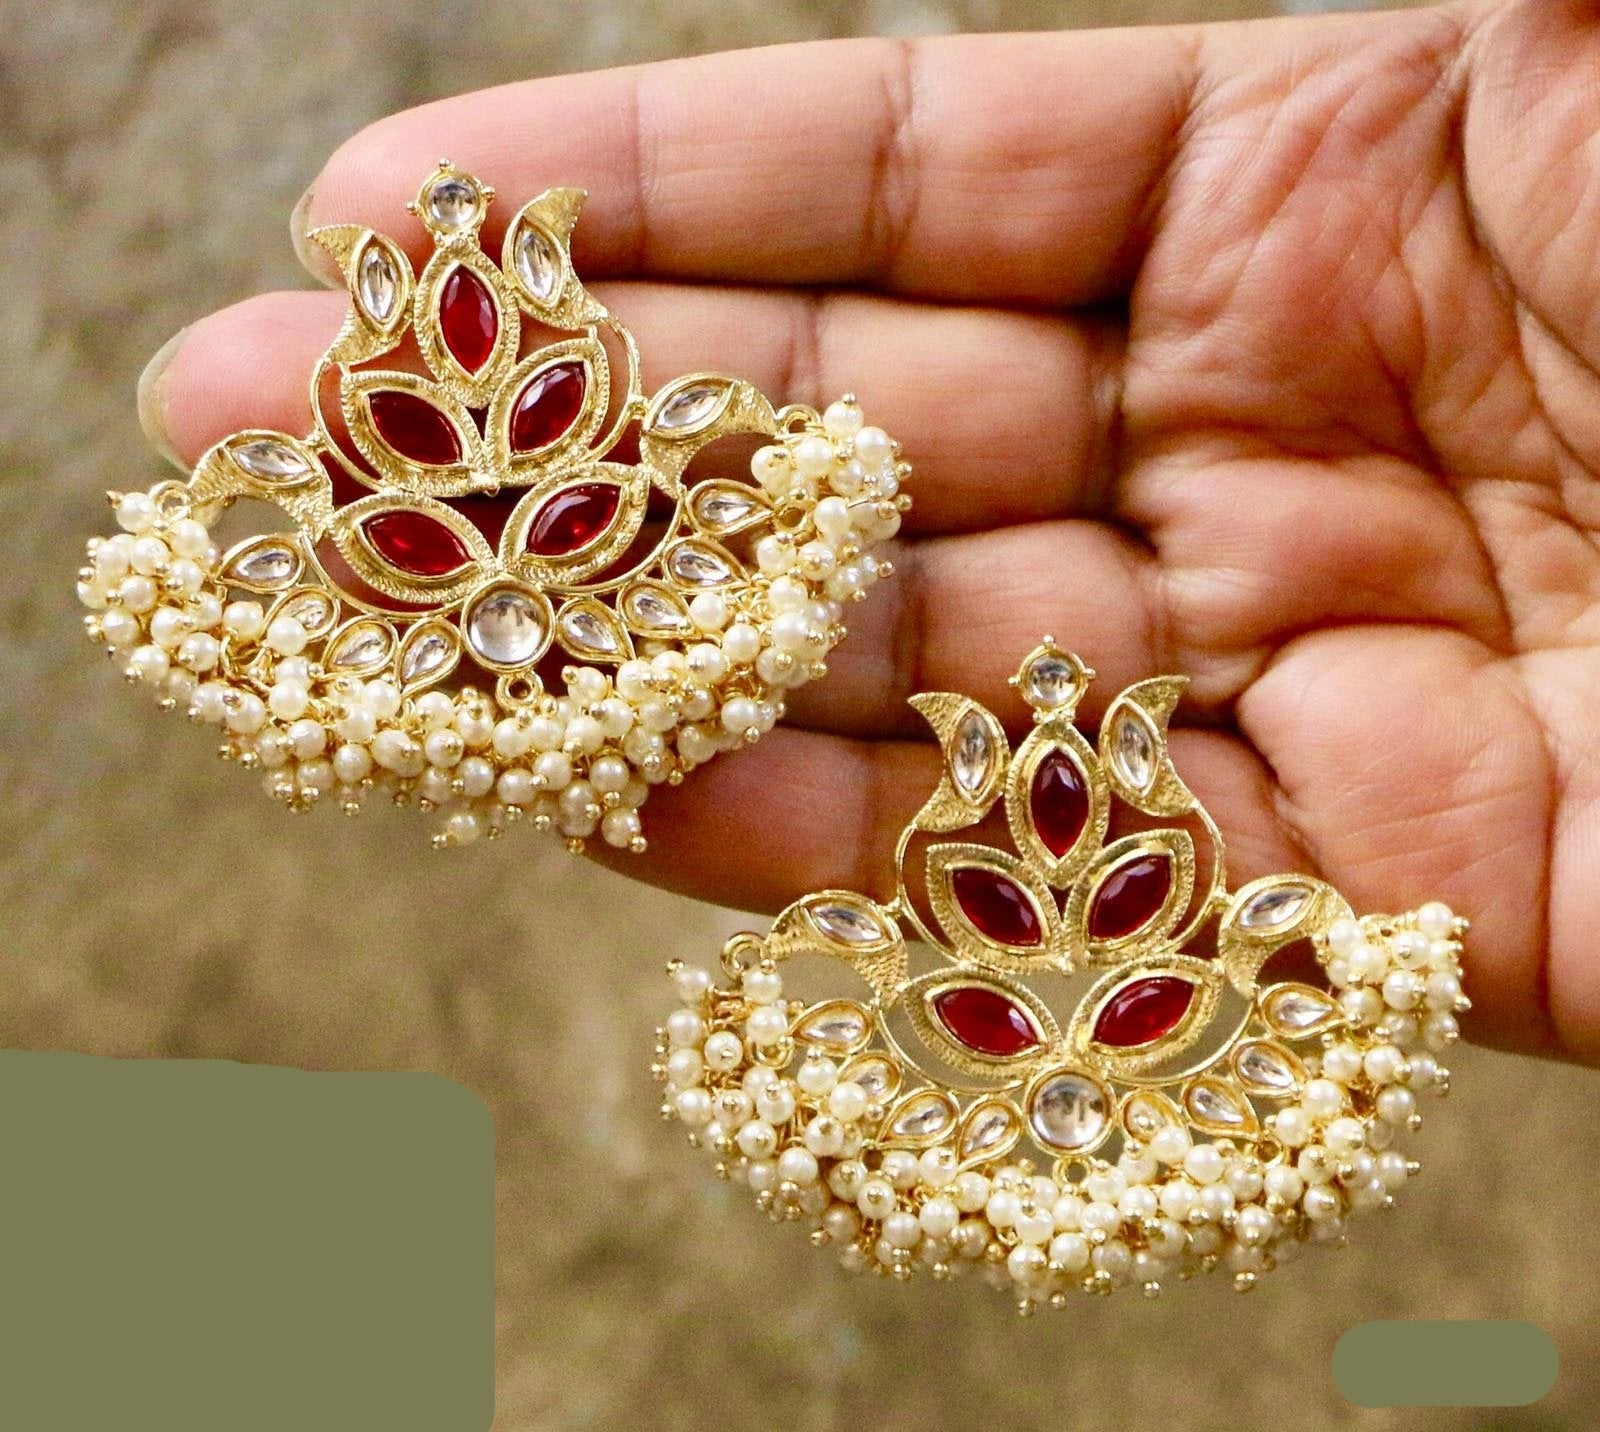 Details more than 203 red gold earrings super hot